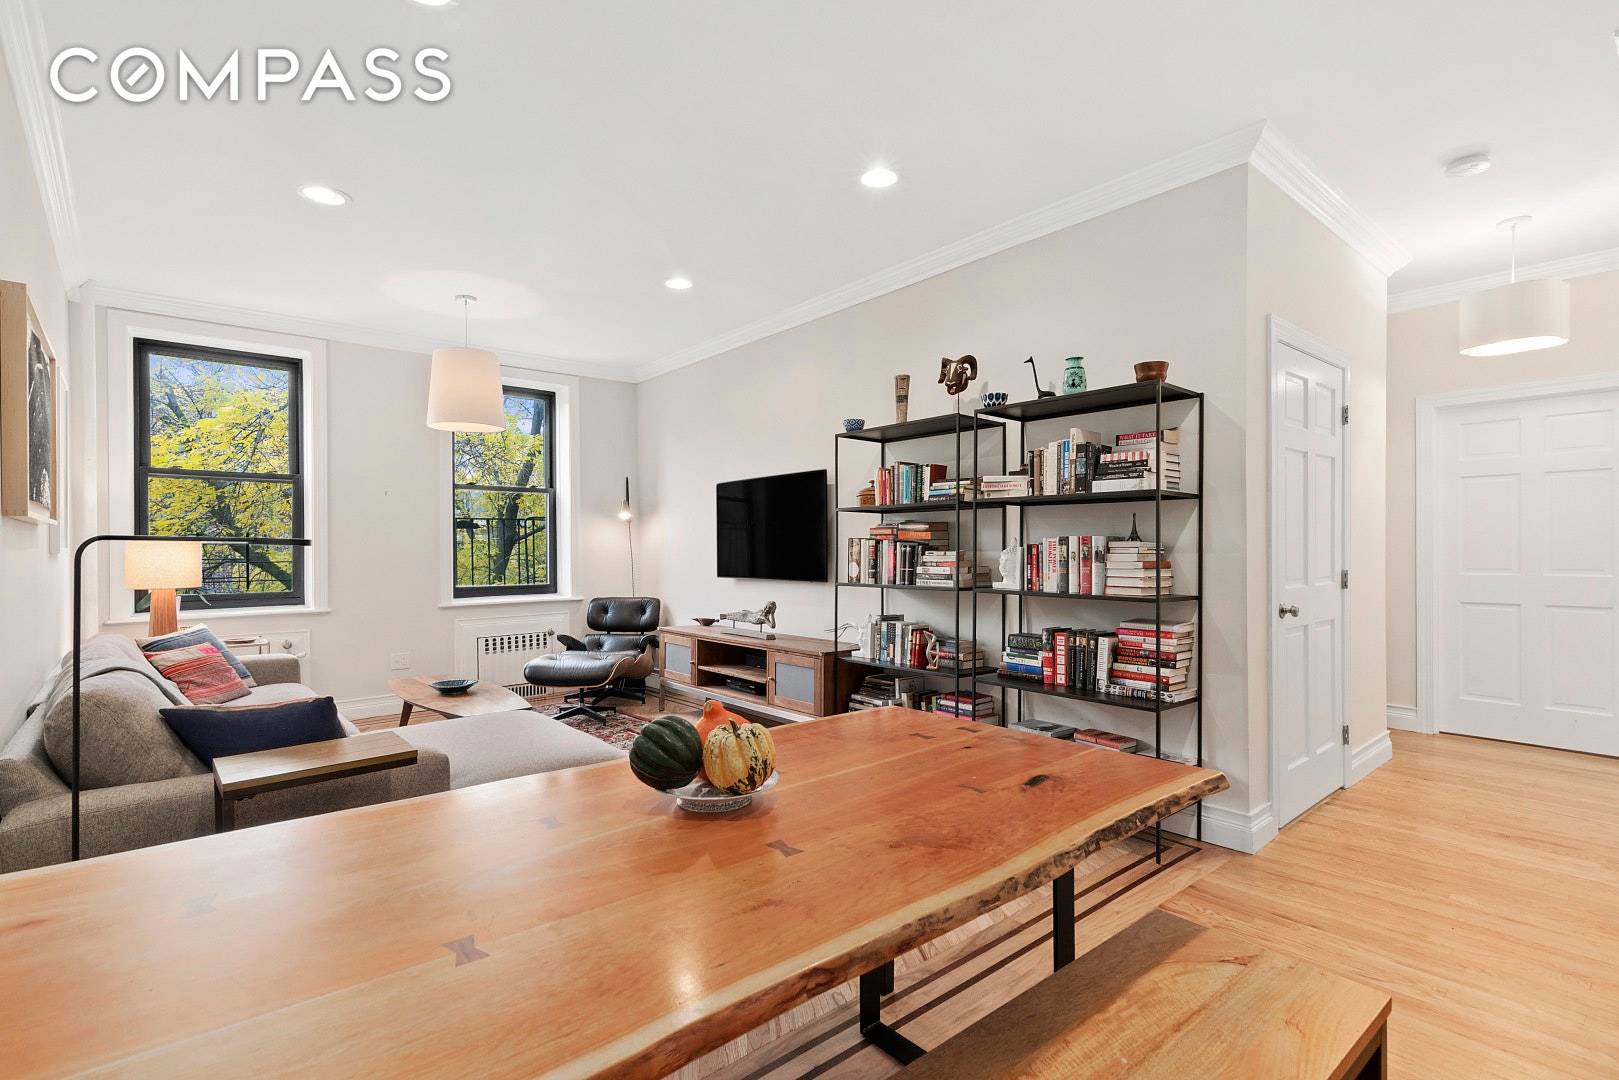 Welcome To 418 St. Johns Pl unit 3A, a 3 bedroom 2 bathroom home that marries the graceful proportions of a pre war apartment with a tastefully renovated modern interior.